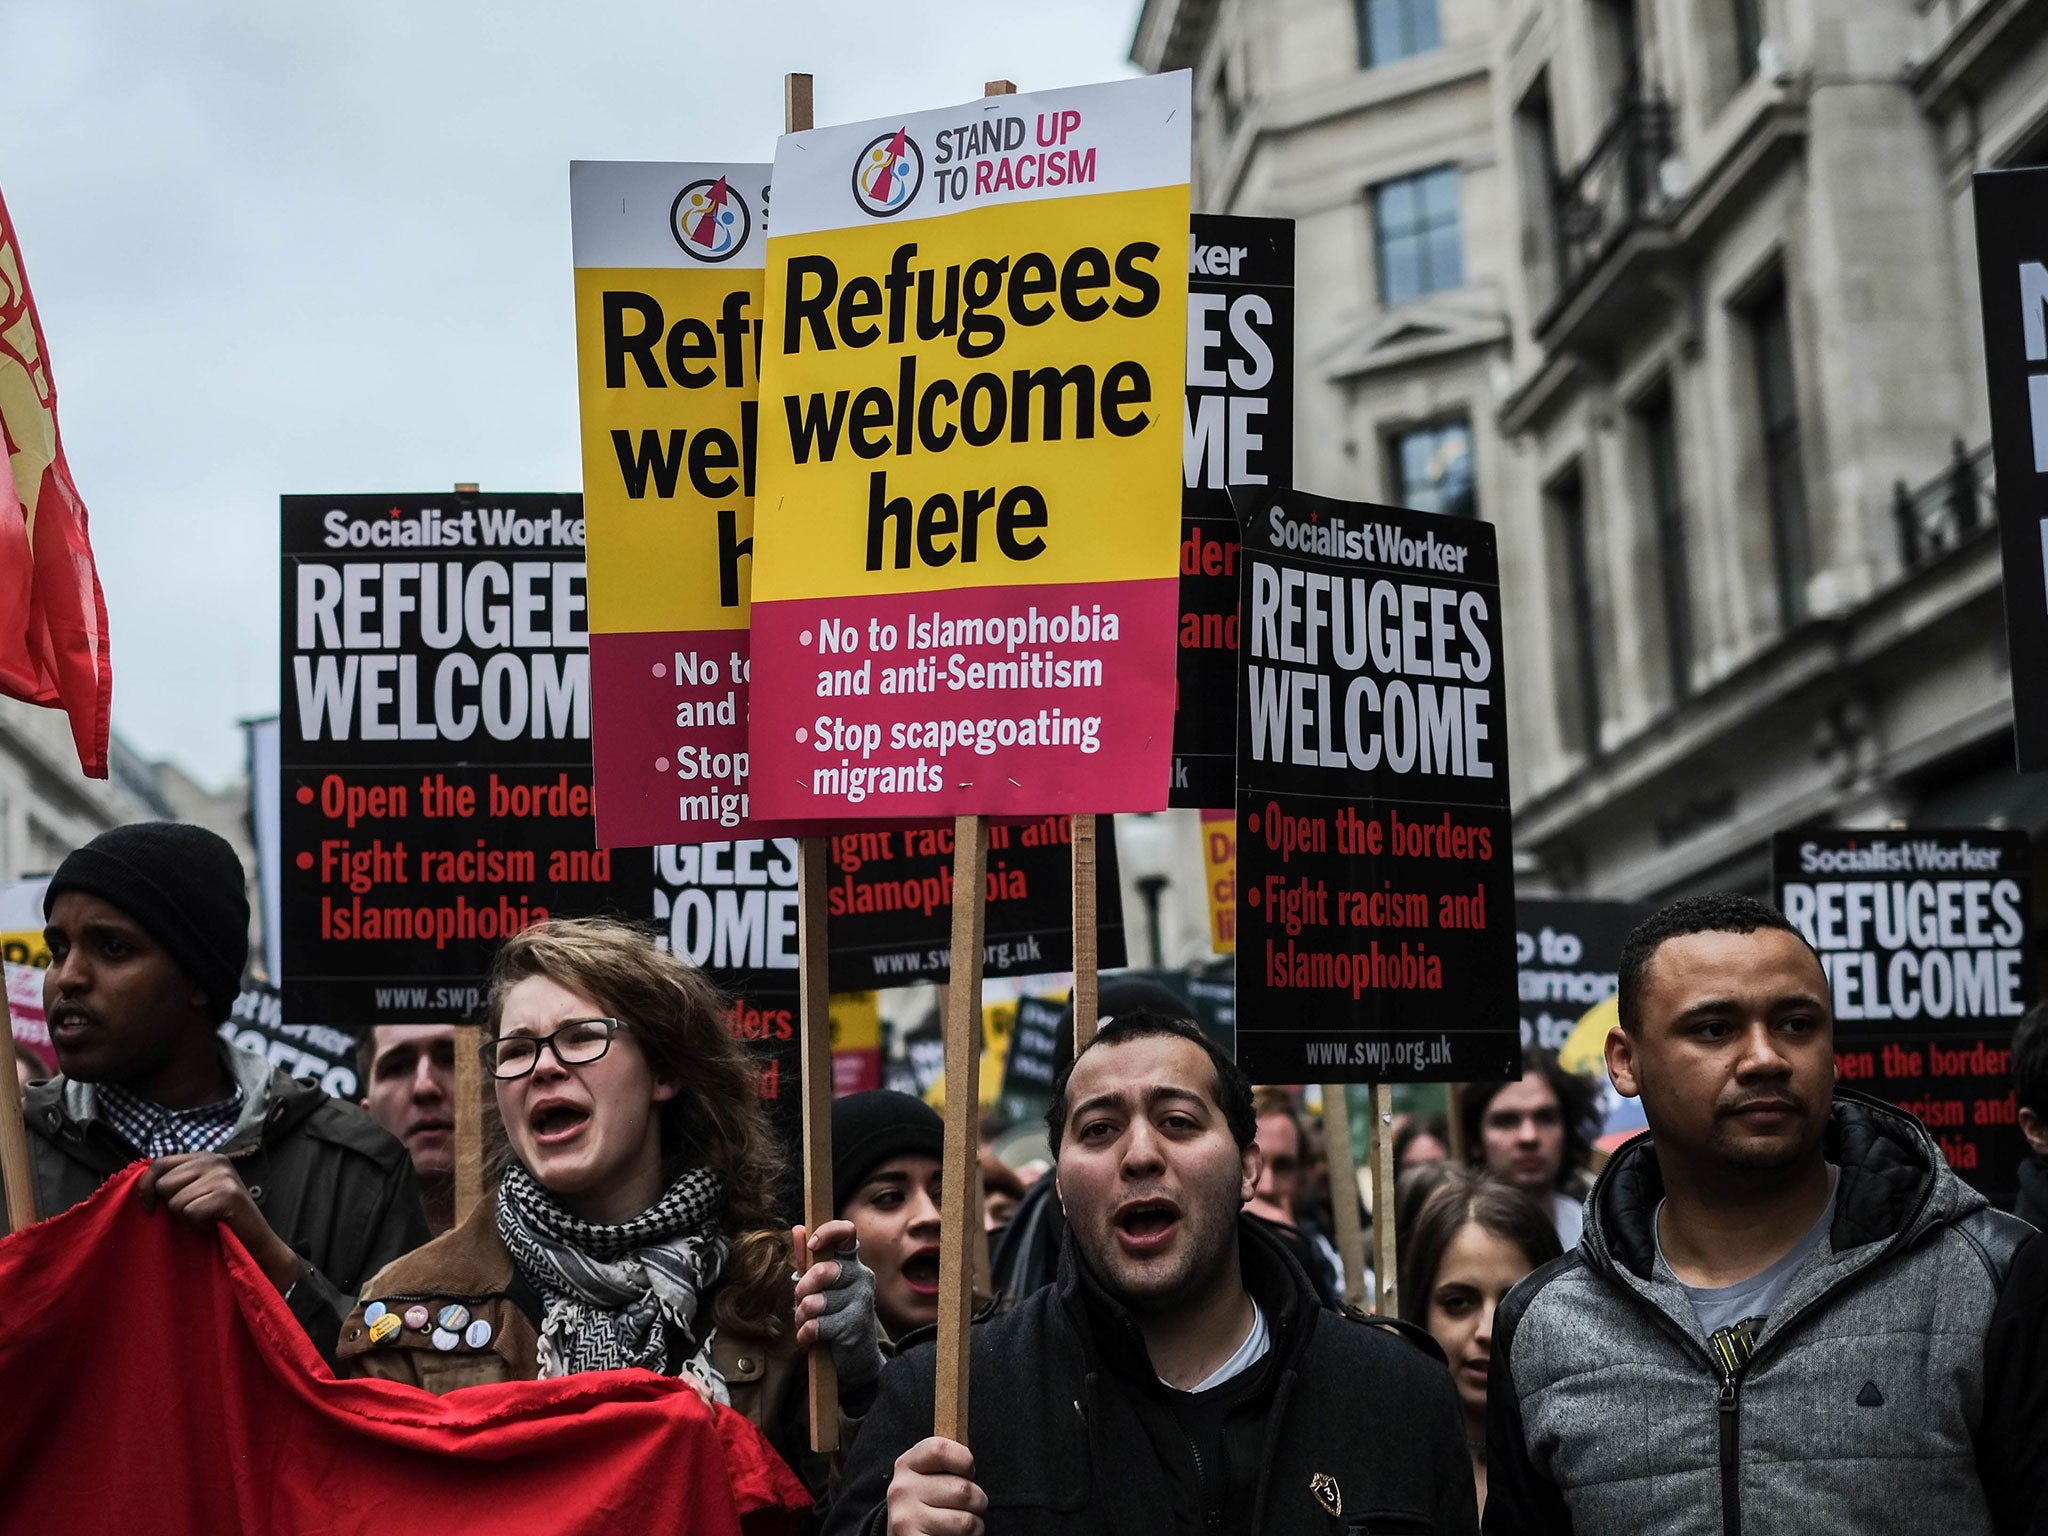 Thousands of people marched through London to show solidarity with refugees, on Saturday 19 March